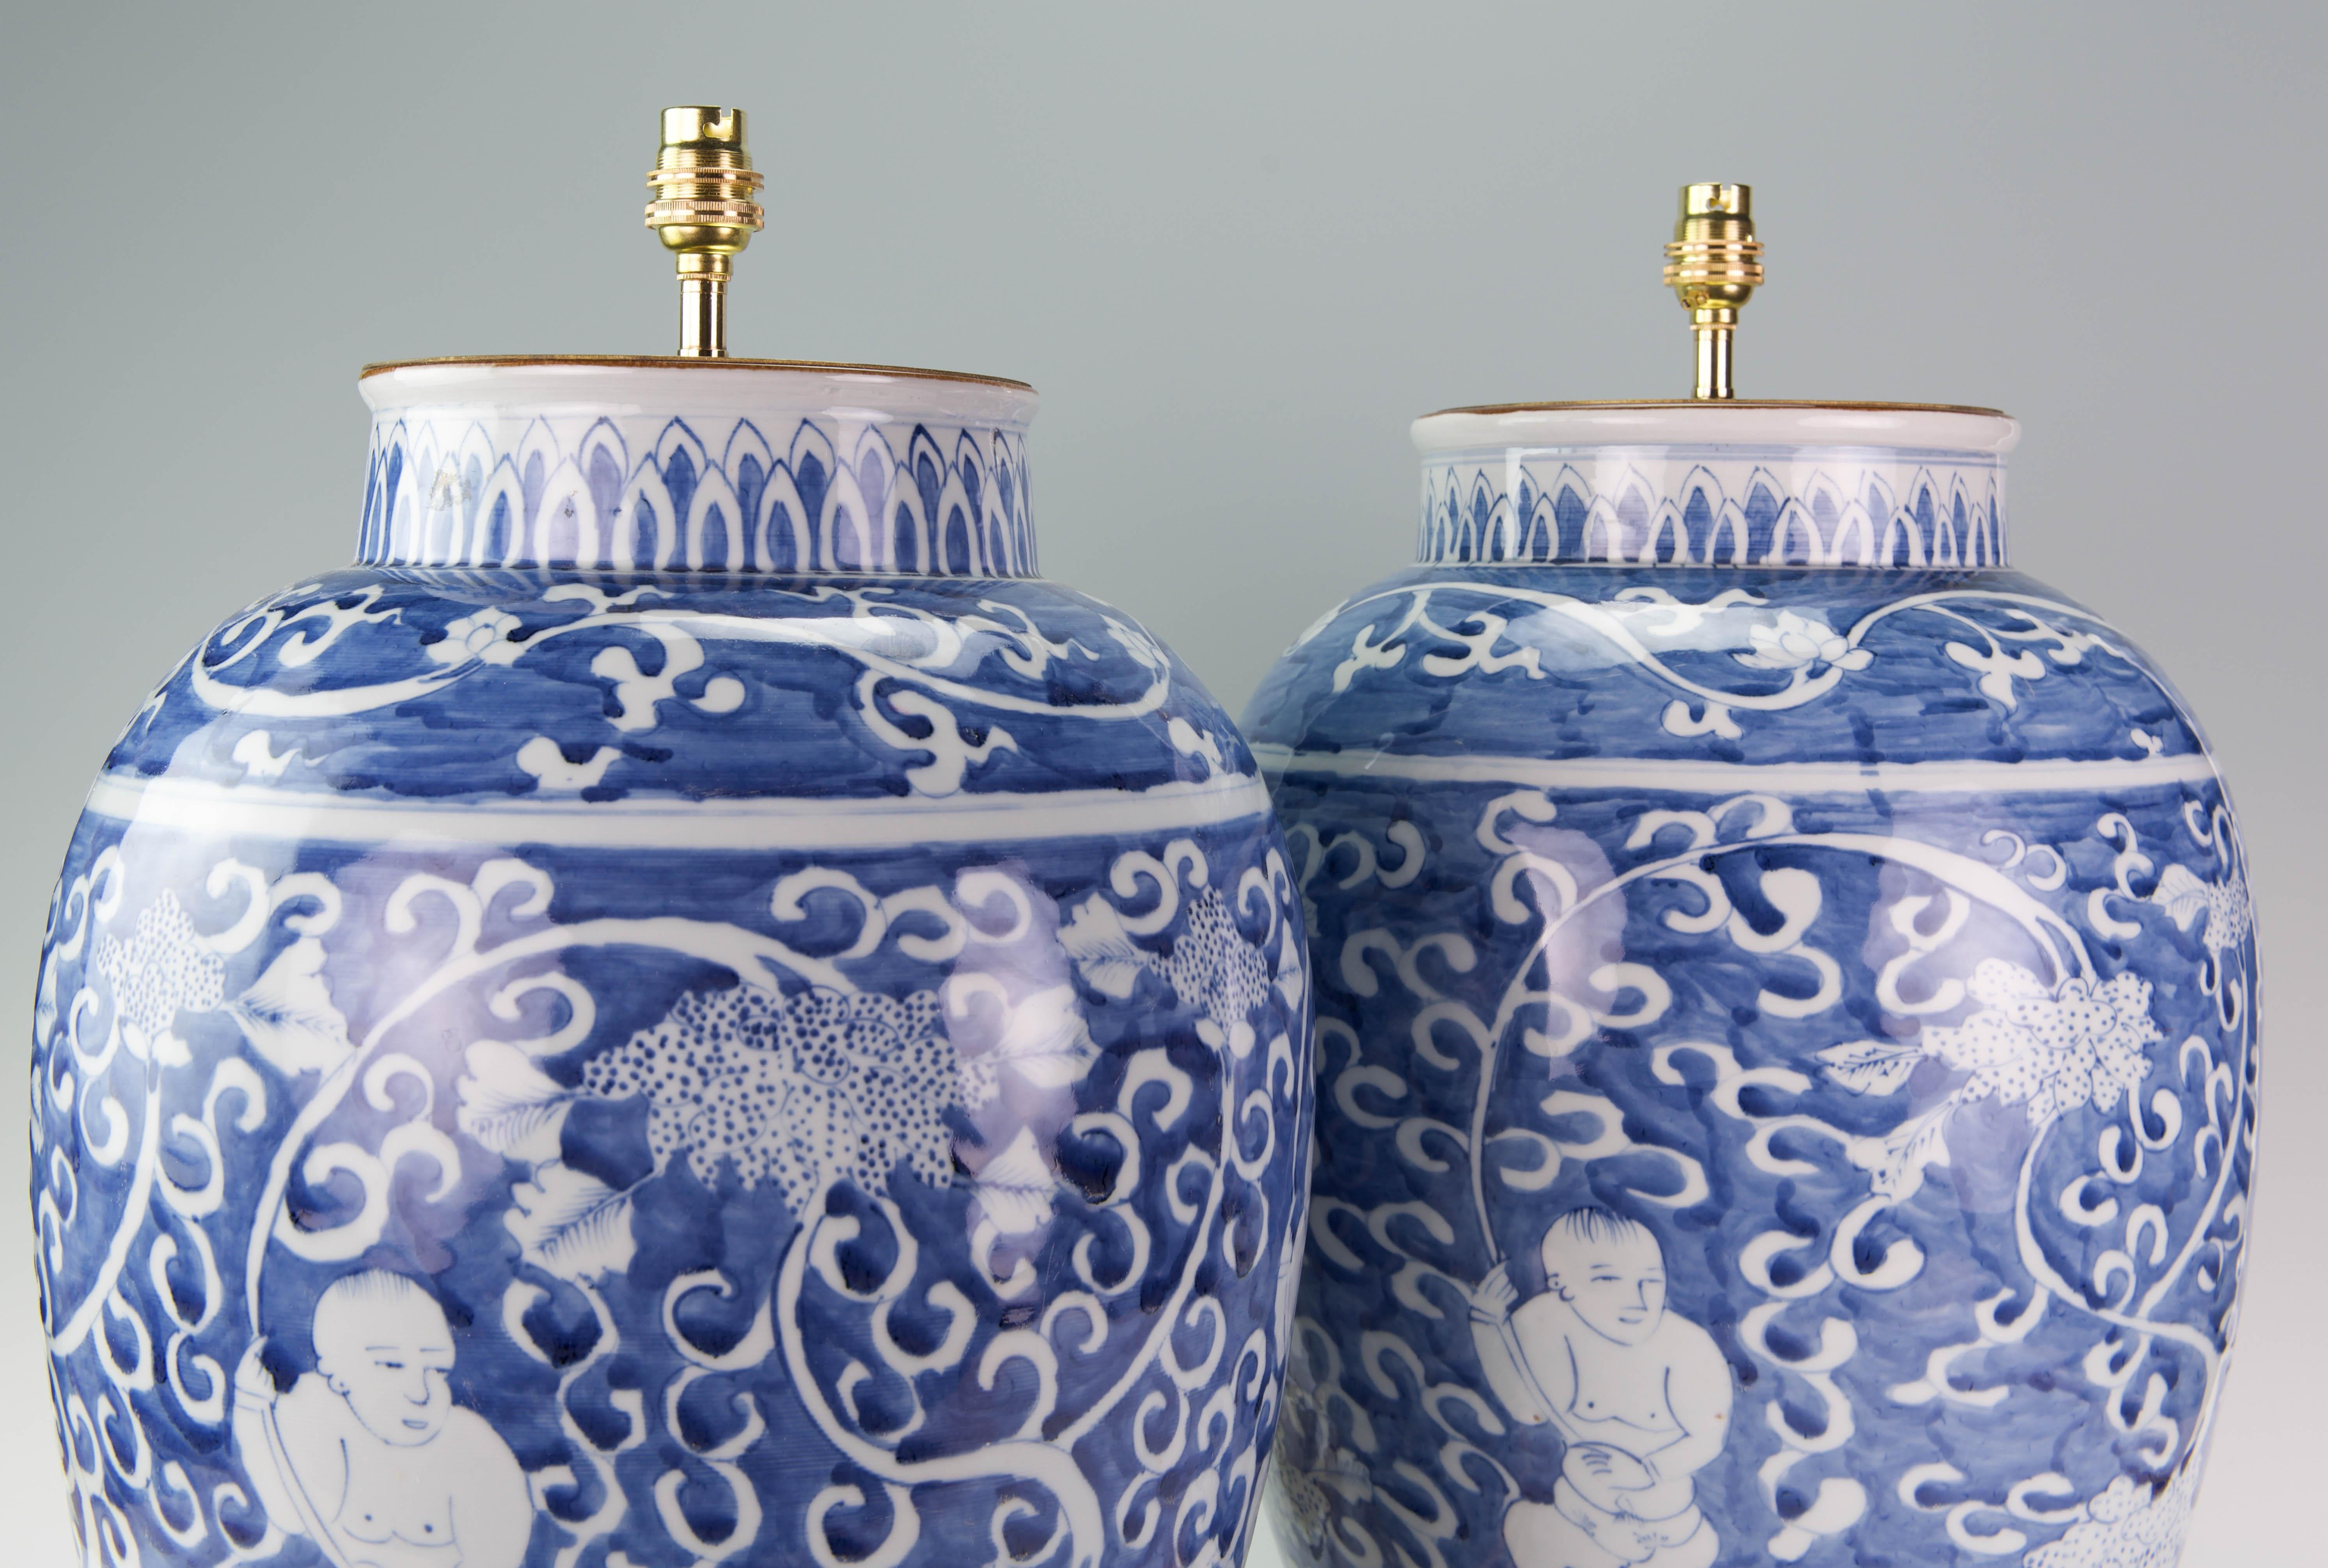 Large Pair of 20th Century Chinese Blue and White Baluster Porcelain Table Lamps For Sale 1